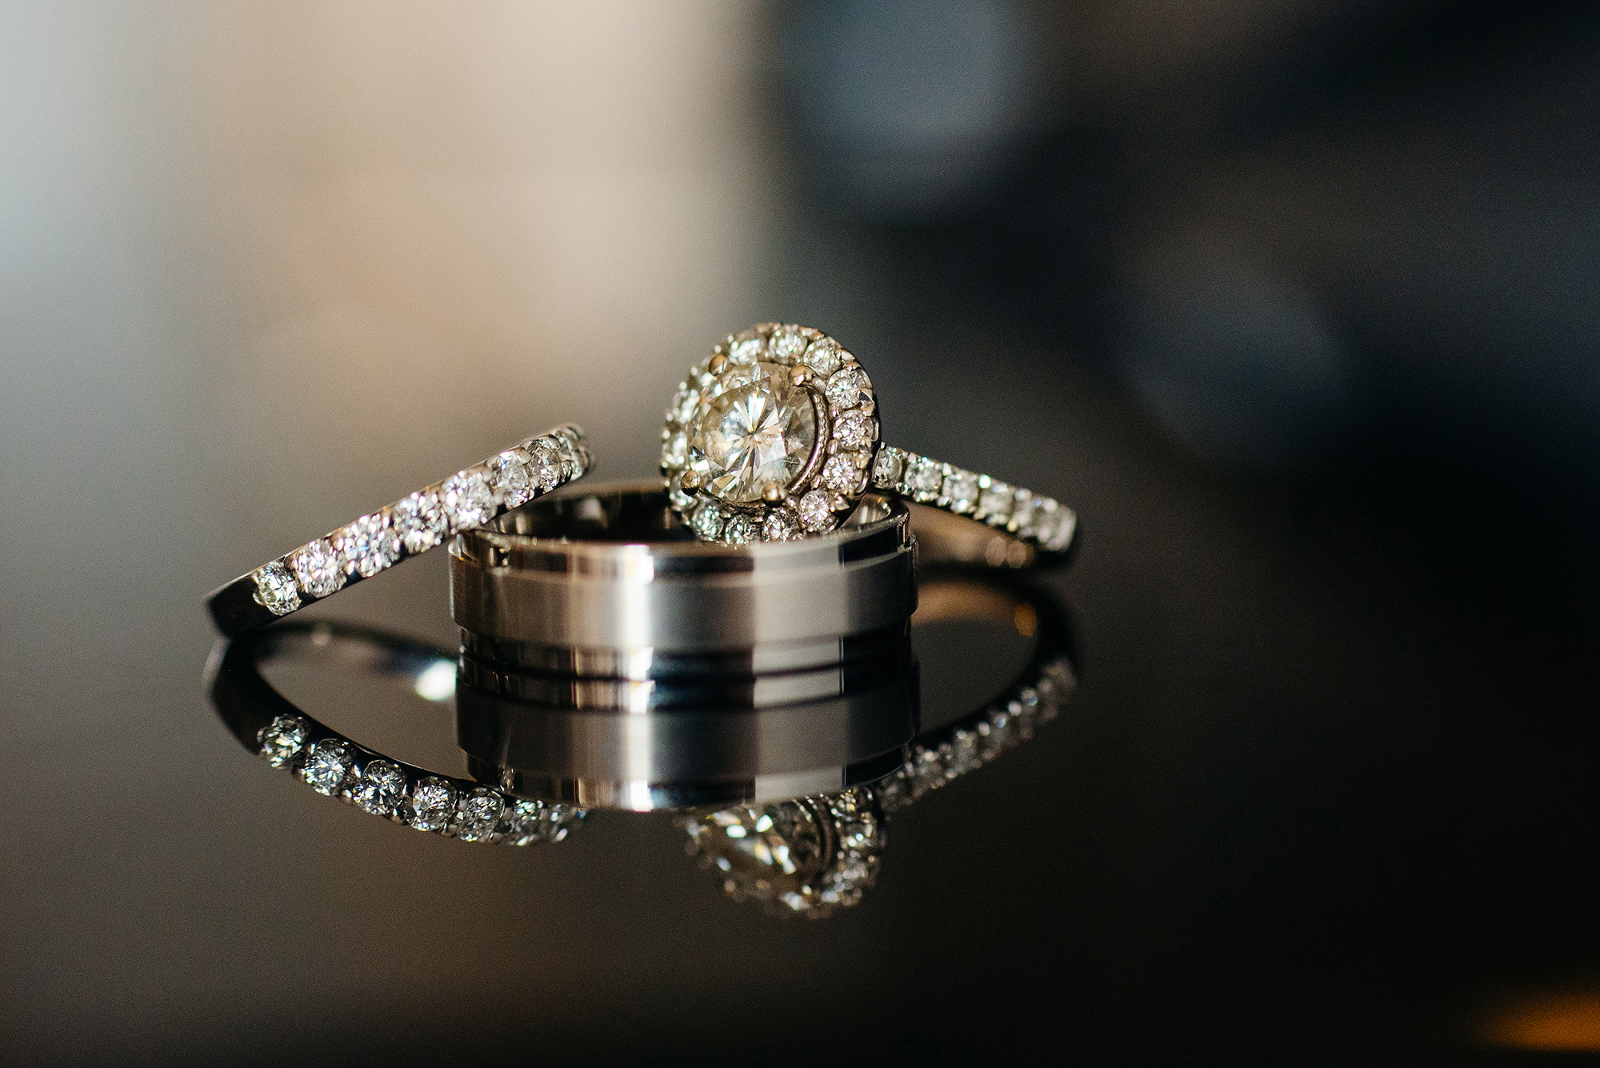 Two wedding rings and a diamond engagement ring on a reflective surface